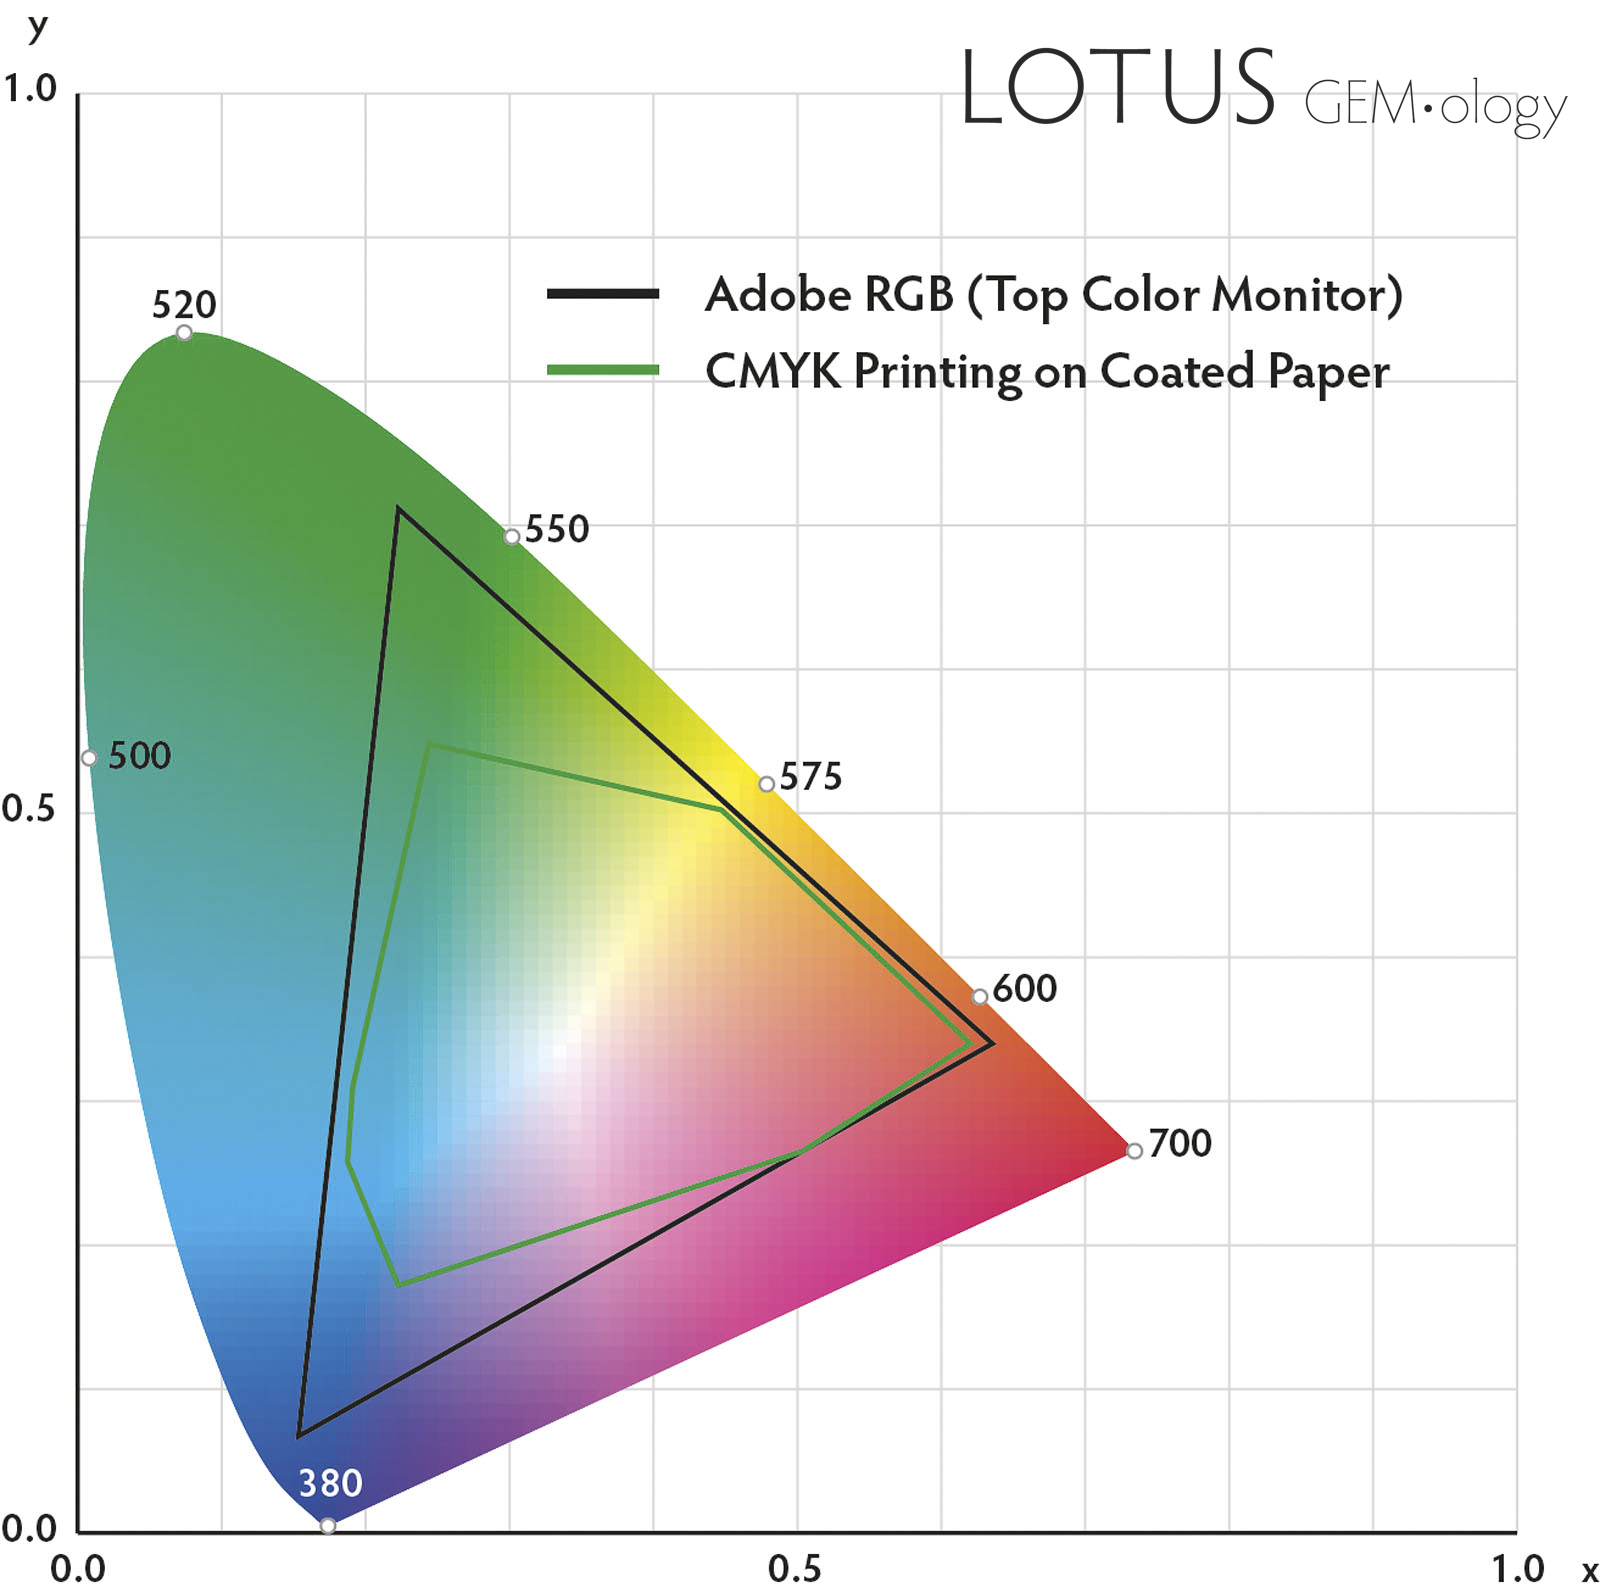 Figure 10. The C.I.E. chromaticity diagram above is used to specify the exact position of all colors visible to the human eye. Note that a computer monitor (represented by Adobe RGB) can only display some of these colors, while the colors that can be printed using the standard CMYK printing process are even further restricted. Since the colors of the most expensive colored gems are often outside both of these “gamuts,” judgment must be made by personal examination, rather than via computer displays or printed images. Illustration: Richard Hughes/Lotus Gemology